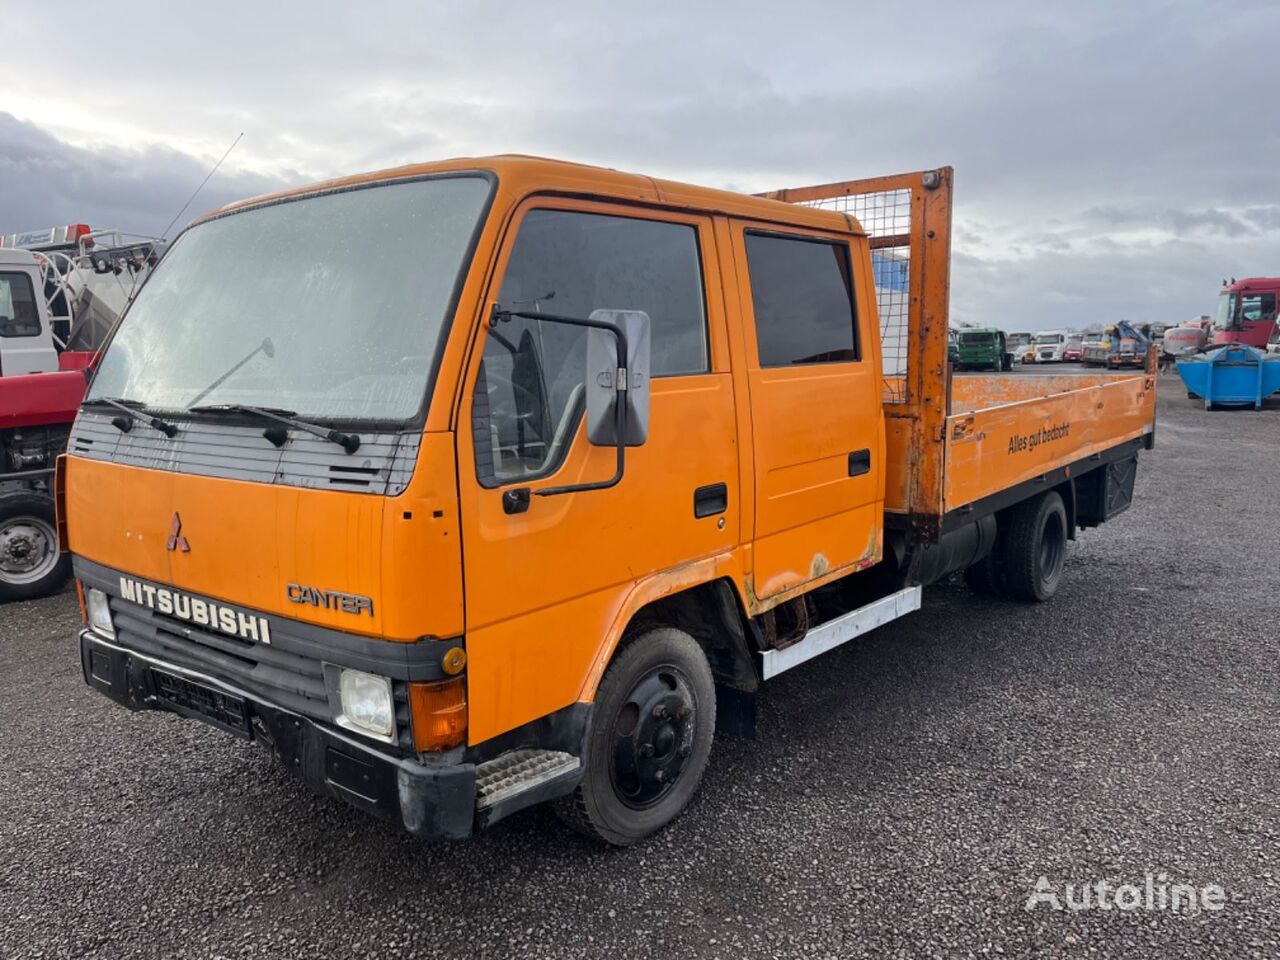 Mitsubishi Canter 3.3 engine good condition flatbed truck